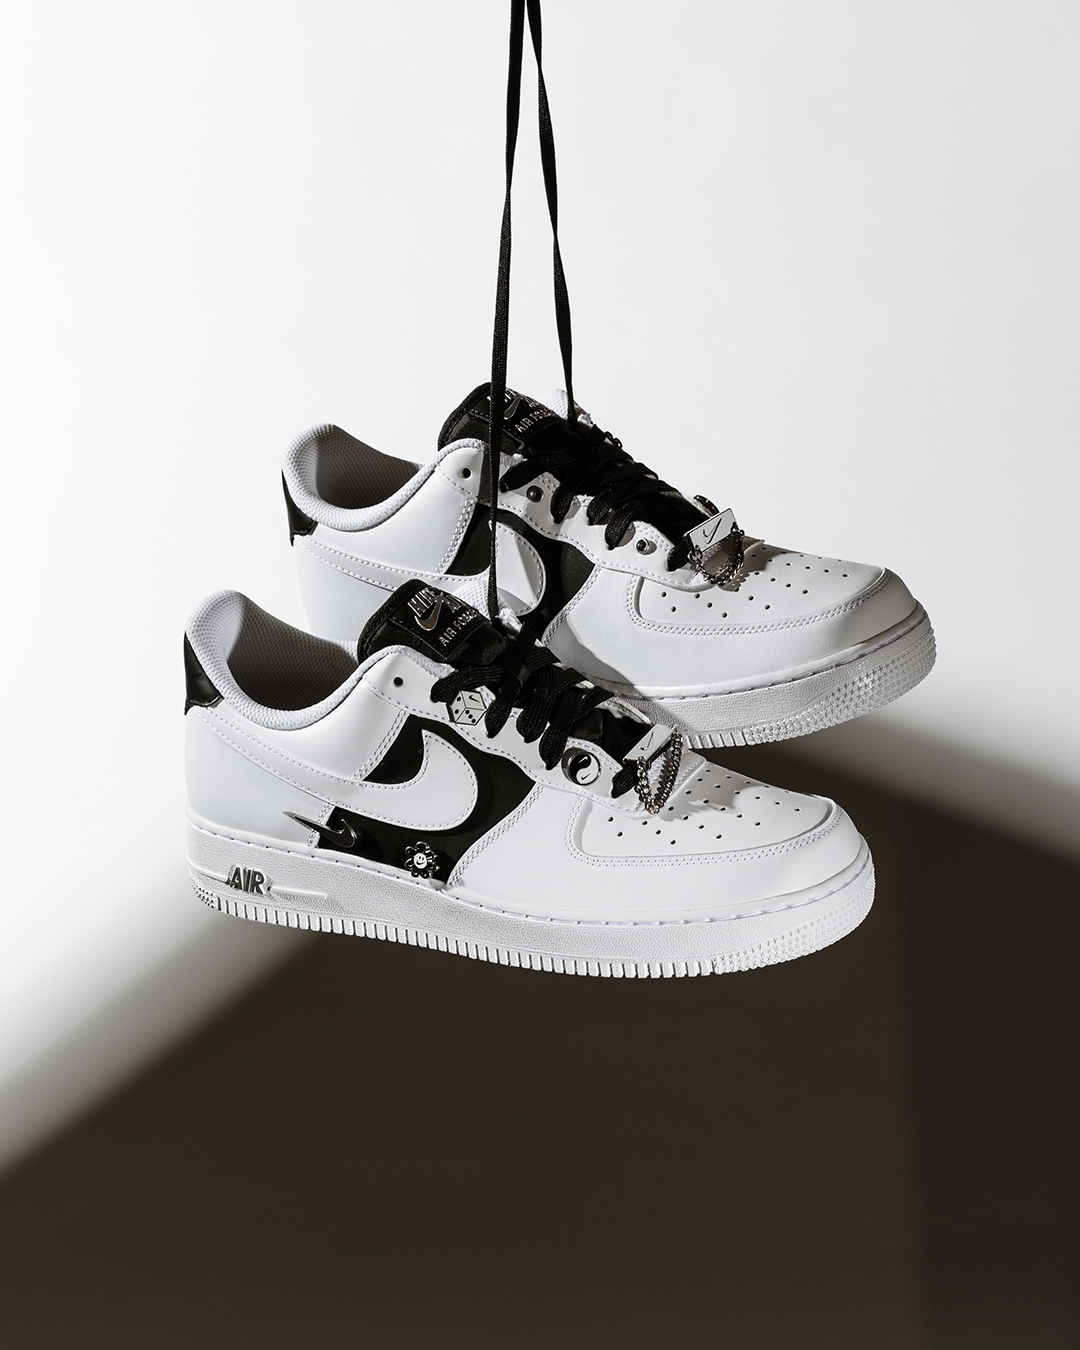 genezen gebied overhead Foot Locker on Twitter: "A few pieces to complement the AF1 💎 #Nike Air  Force One 'Shoelery' available online + in-store. Shop:  https://t.co/t2QkOWHTv2 https://t.co/QSB8j0g1TP" / Twitter